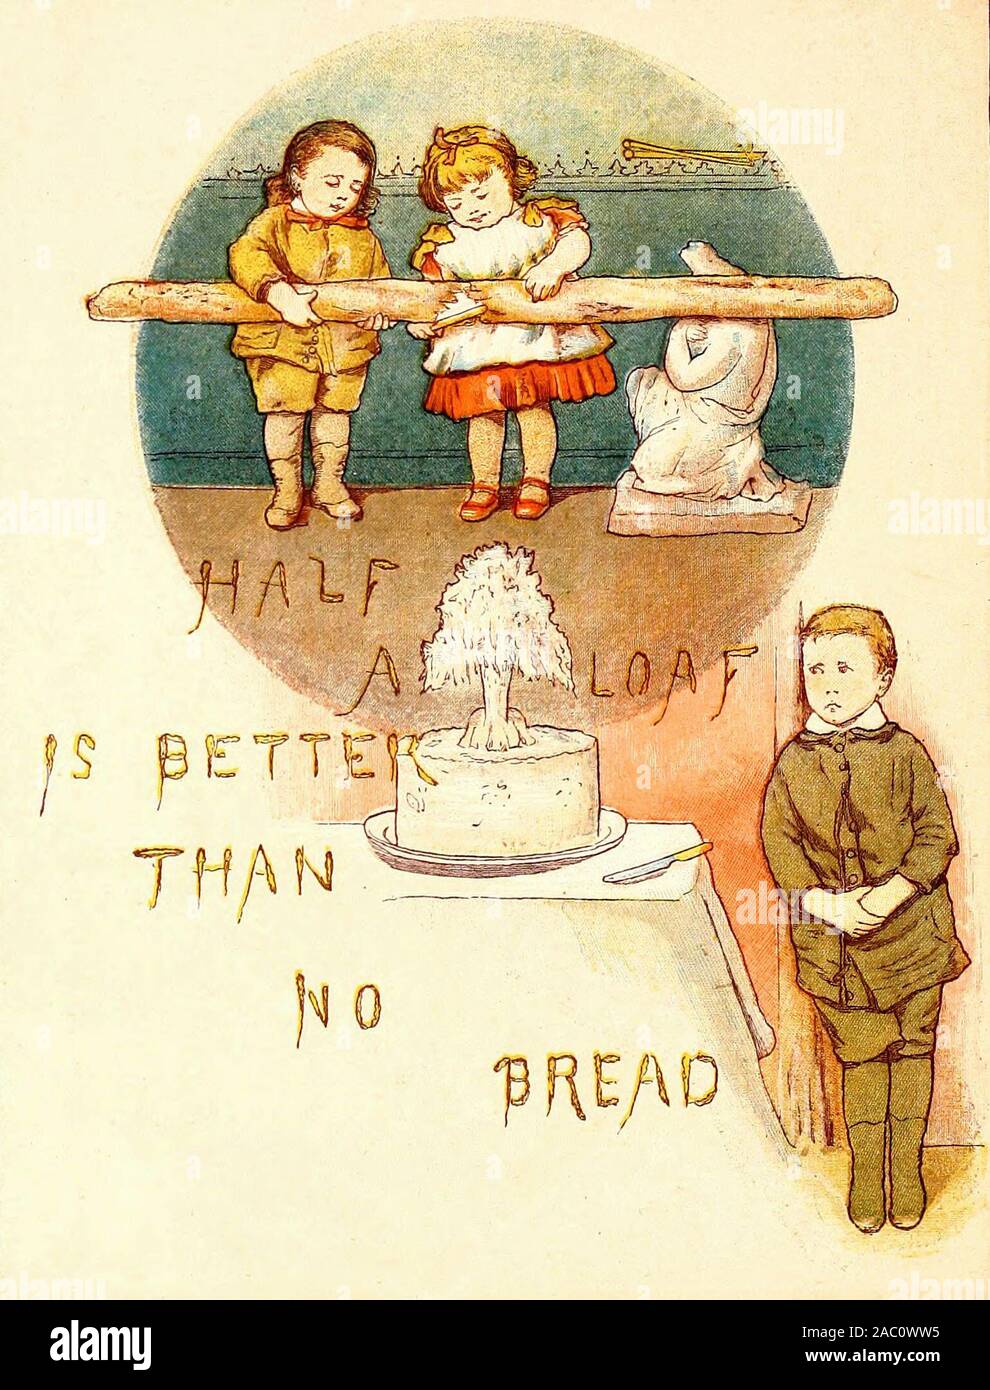 Half a loaf is better than no bread - A vintage illustration of an old proverb Stock Photo